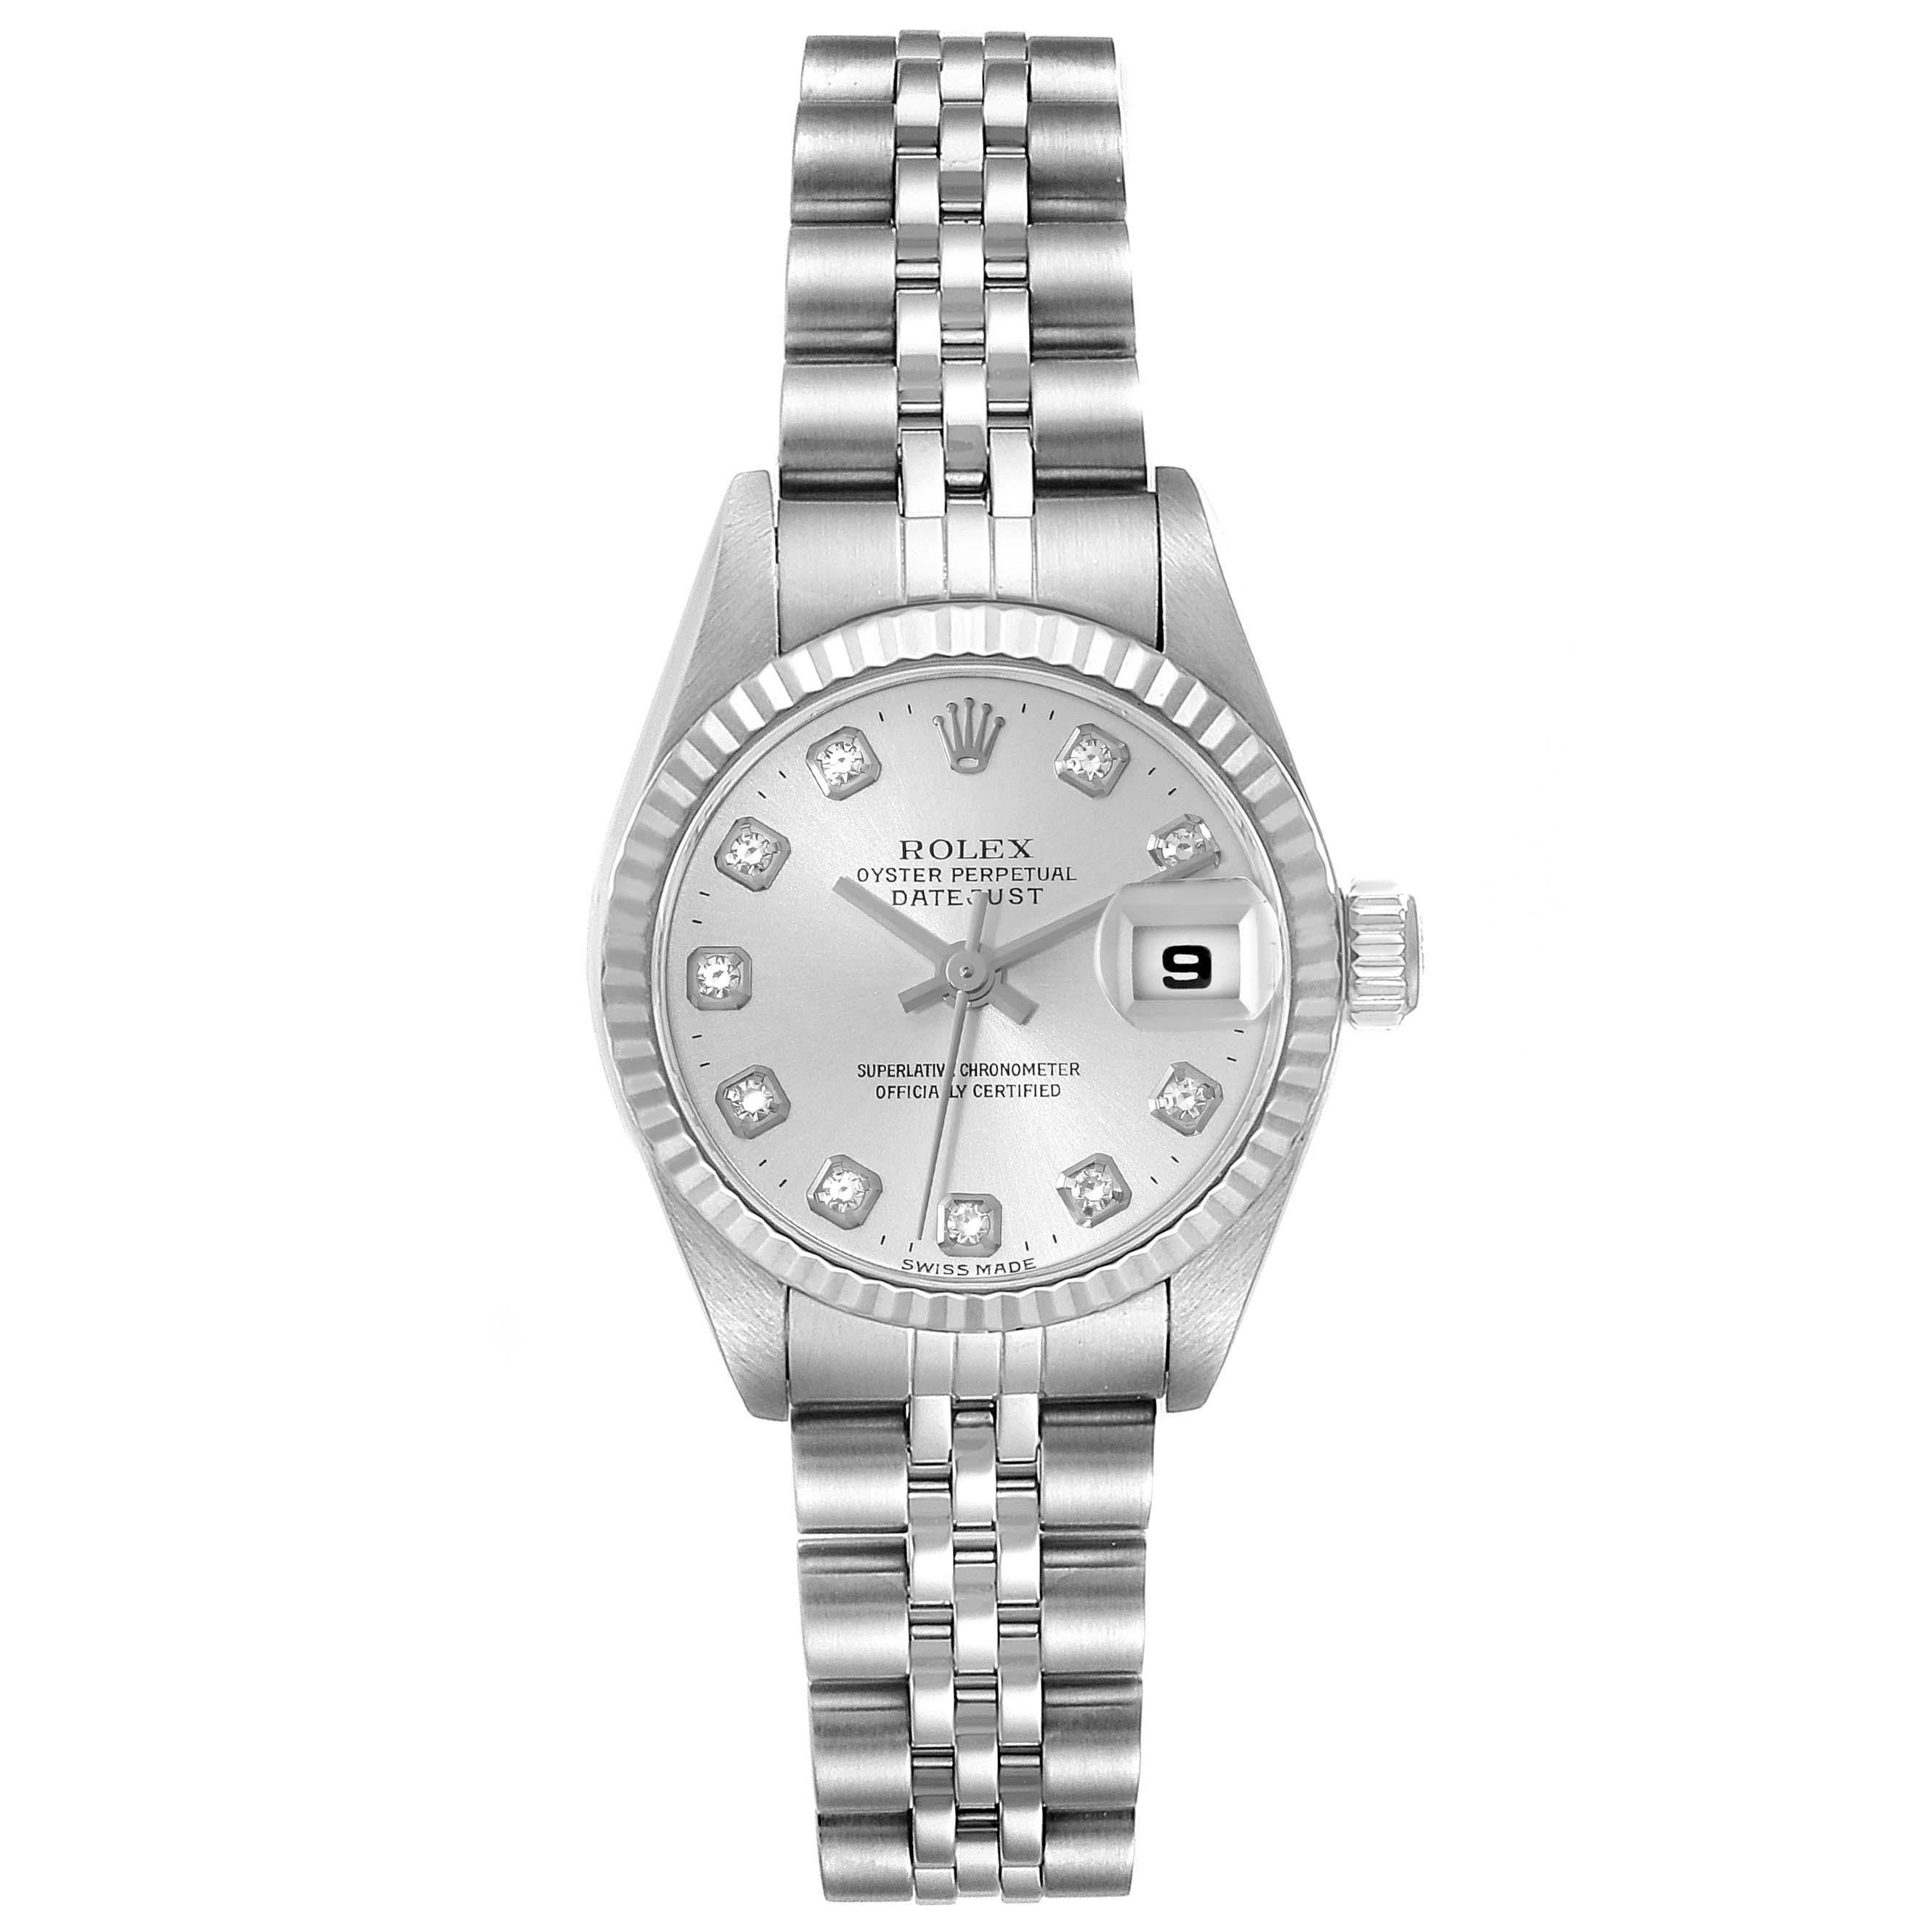 Rolex Datejust Steel White Gold Diamond Dial Ladies Watch 79174. Officially certified chronometer automatic self-winding movement. Stainless steel oyster case 26.0 mm in diameter. Rolex logo on a crown. 18K white gold fluted bezel. Scratch resistant